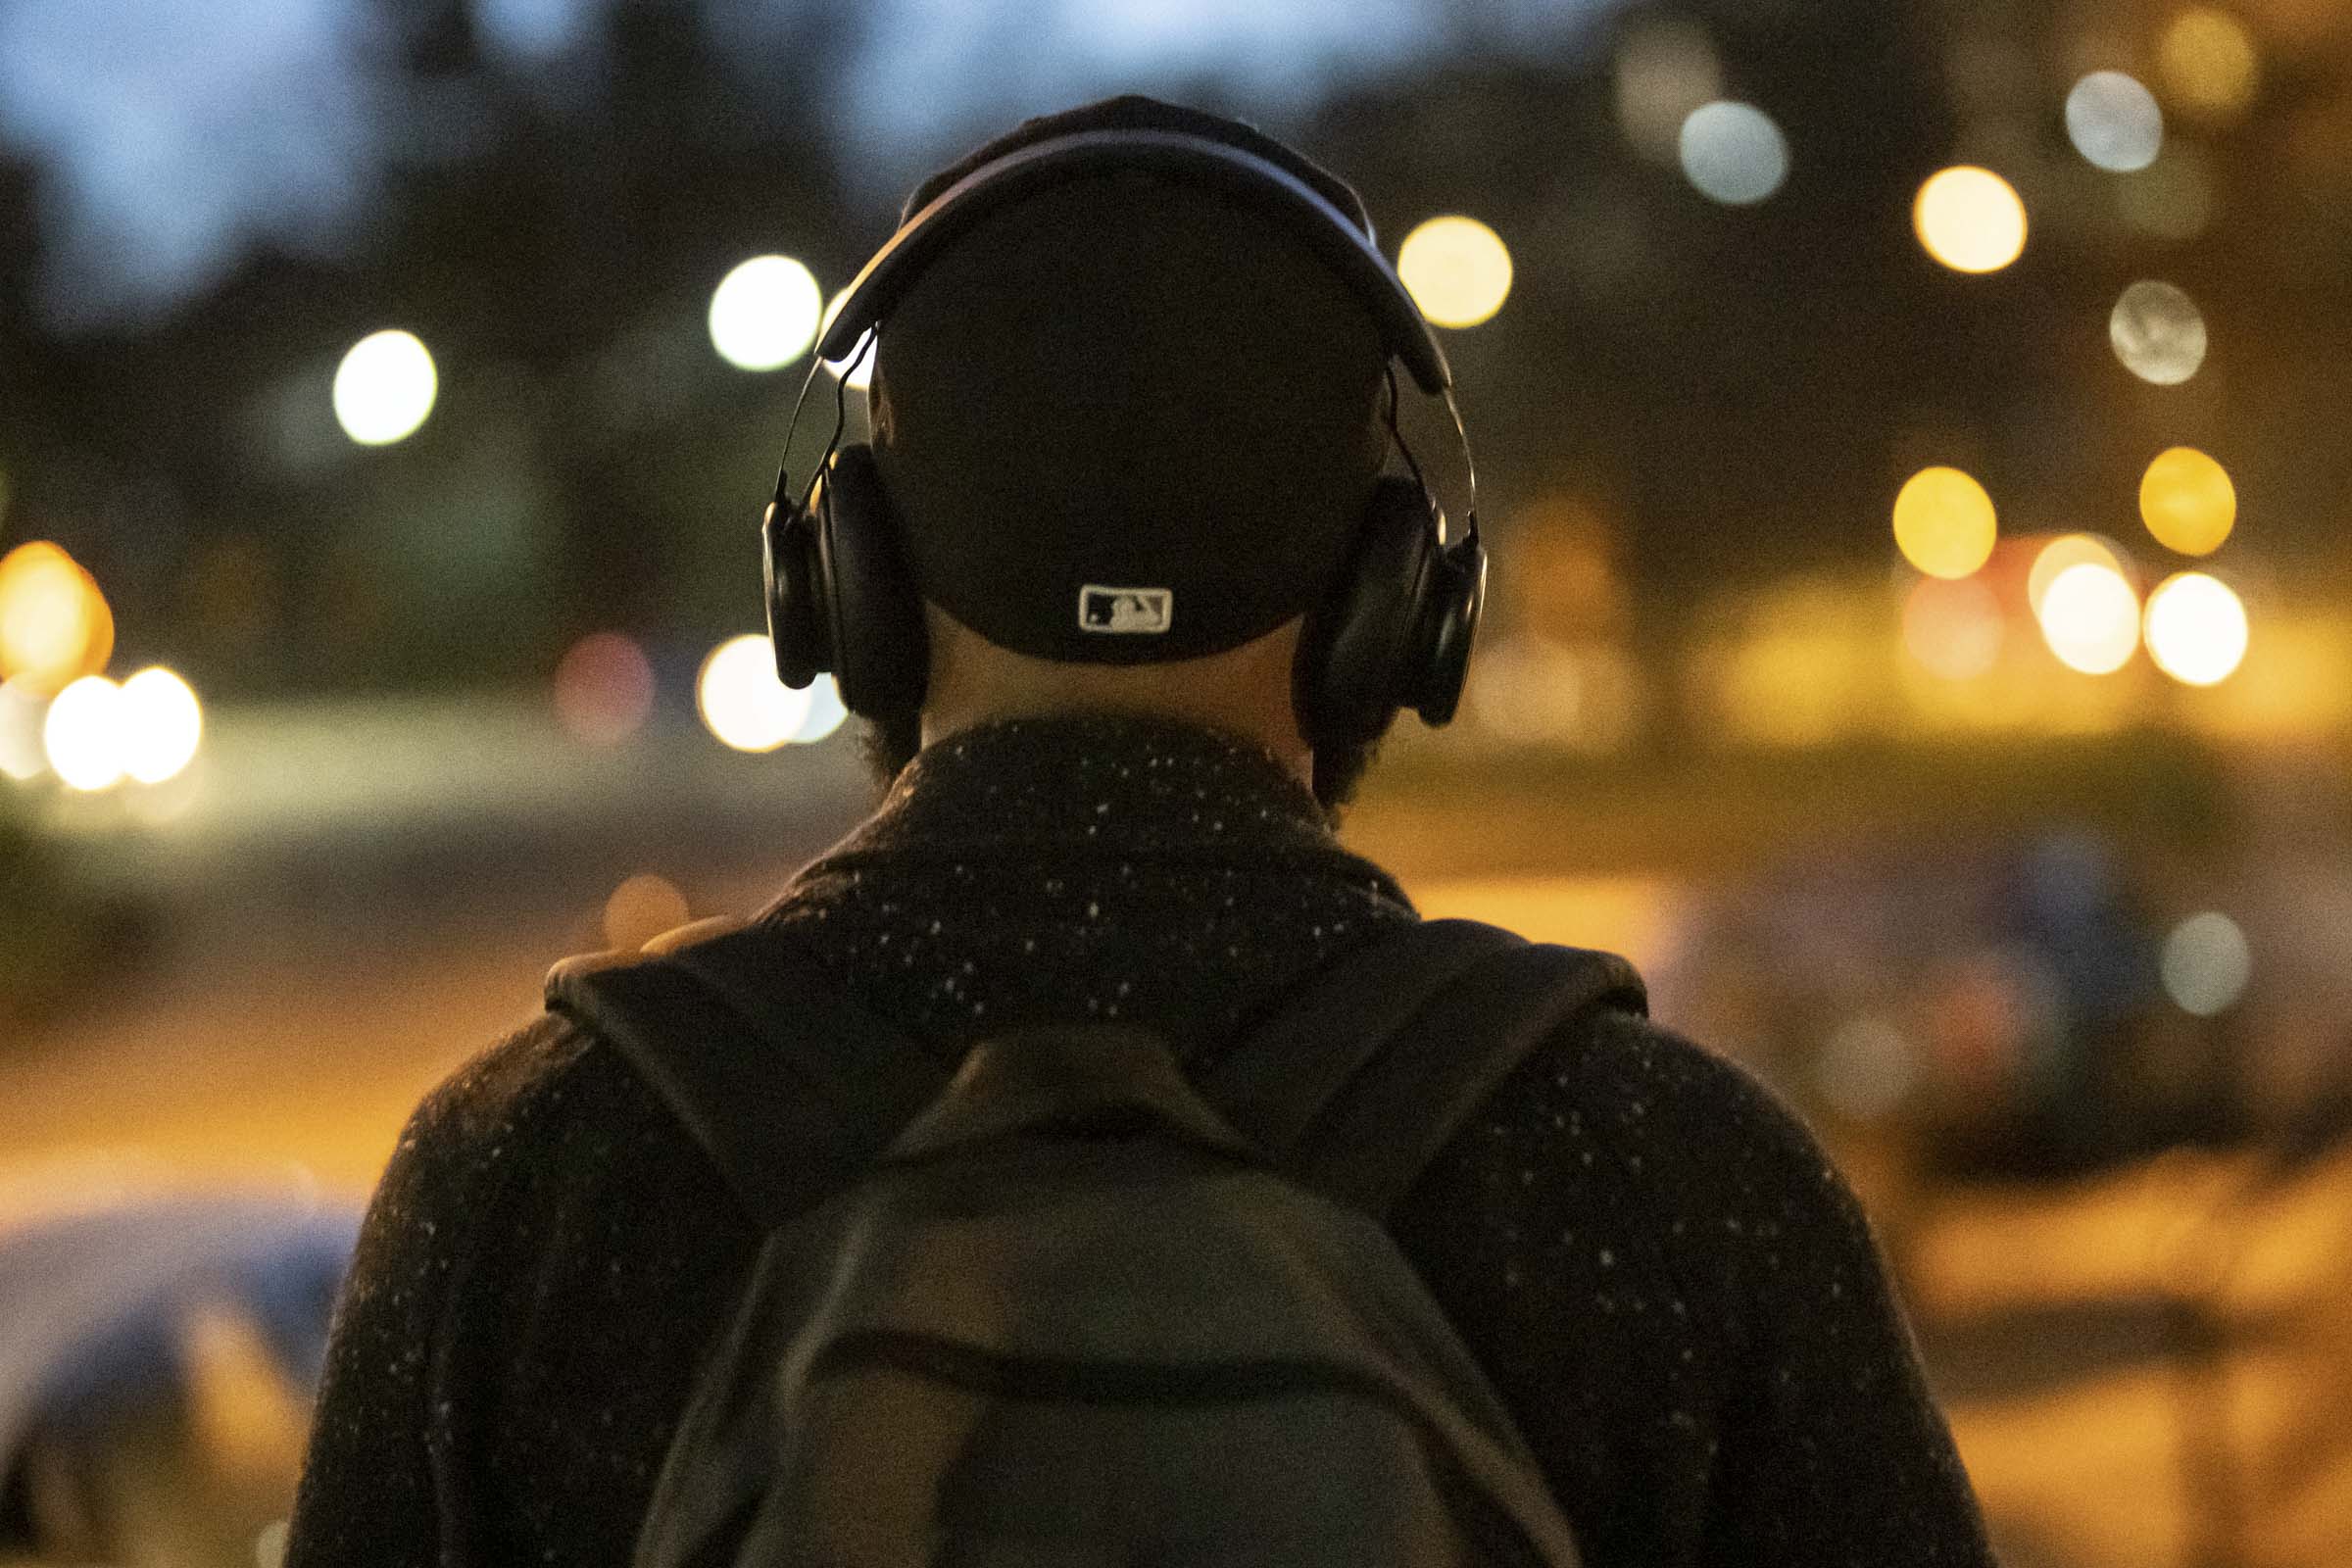 War lights twinkle in the street at dusk as Carson, wearing a backpack and headphones, walks away.